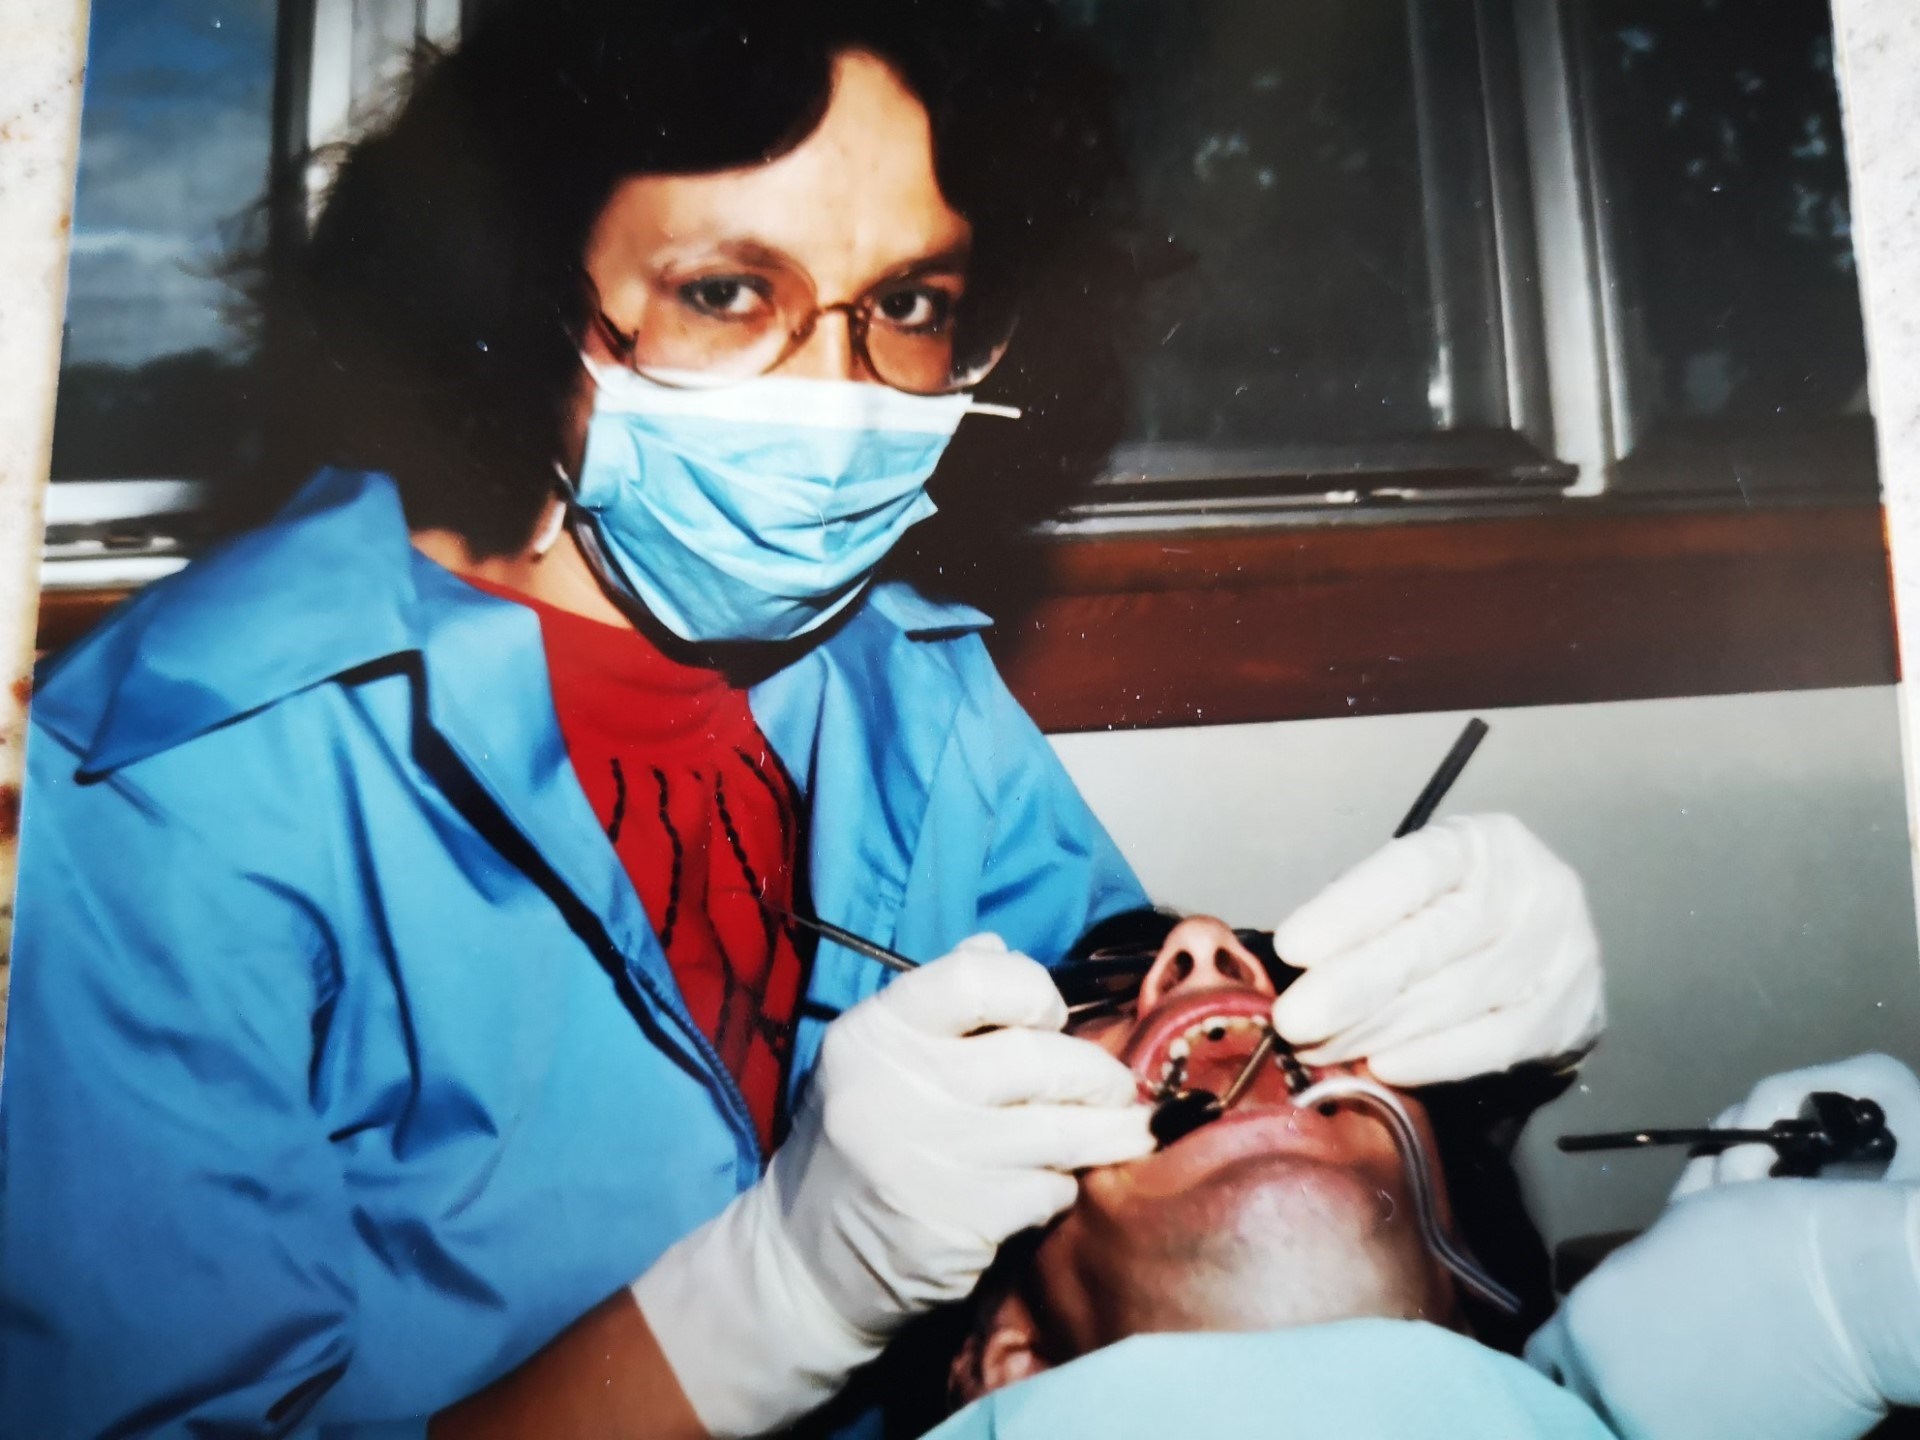 Senator McCallum looks up from a patient in this photo from 1978, when she was a dental nurse.